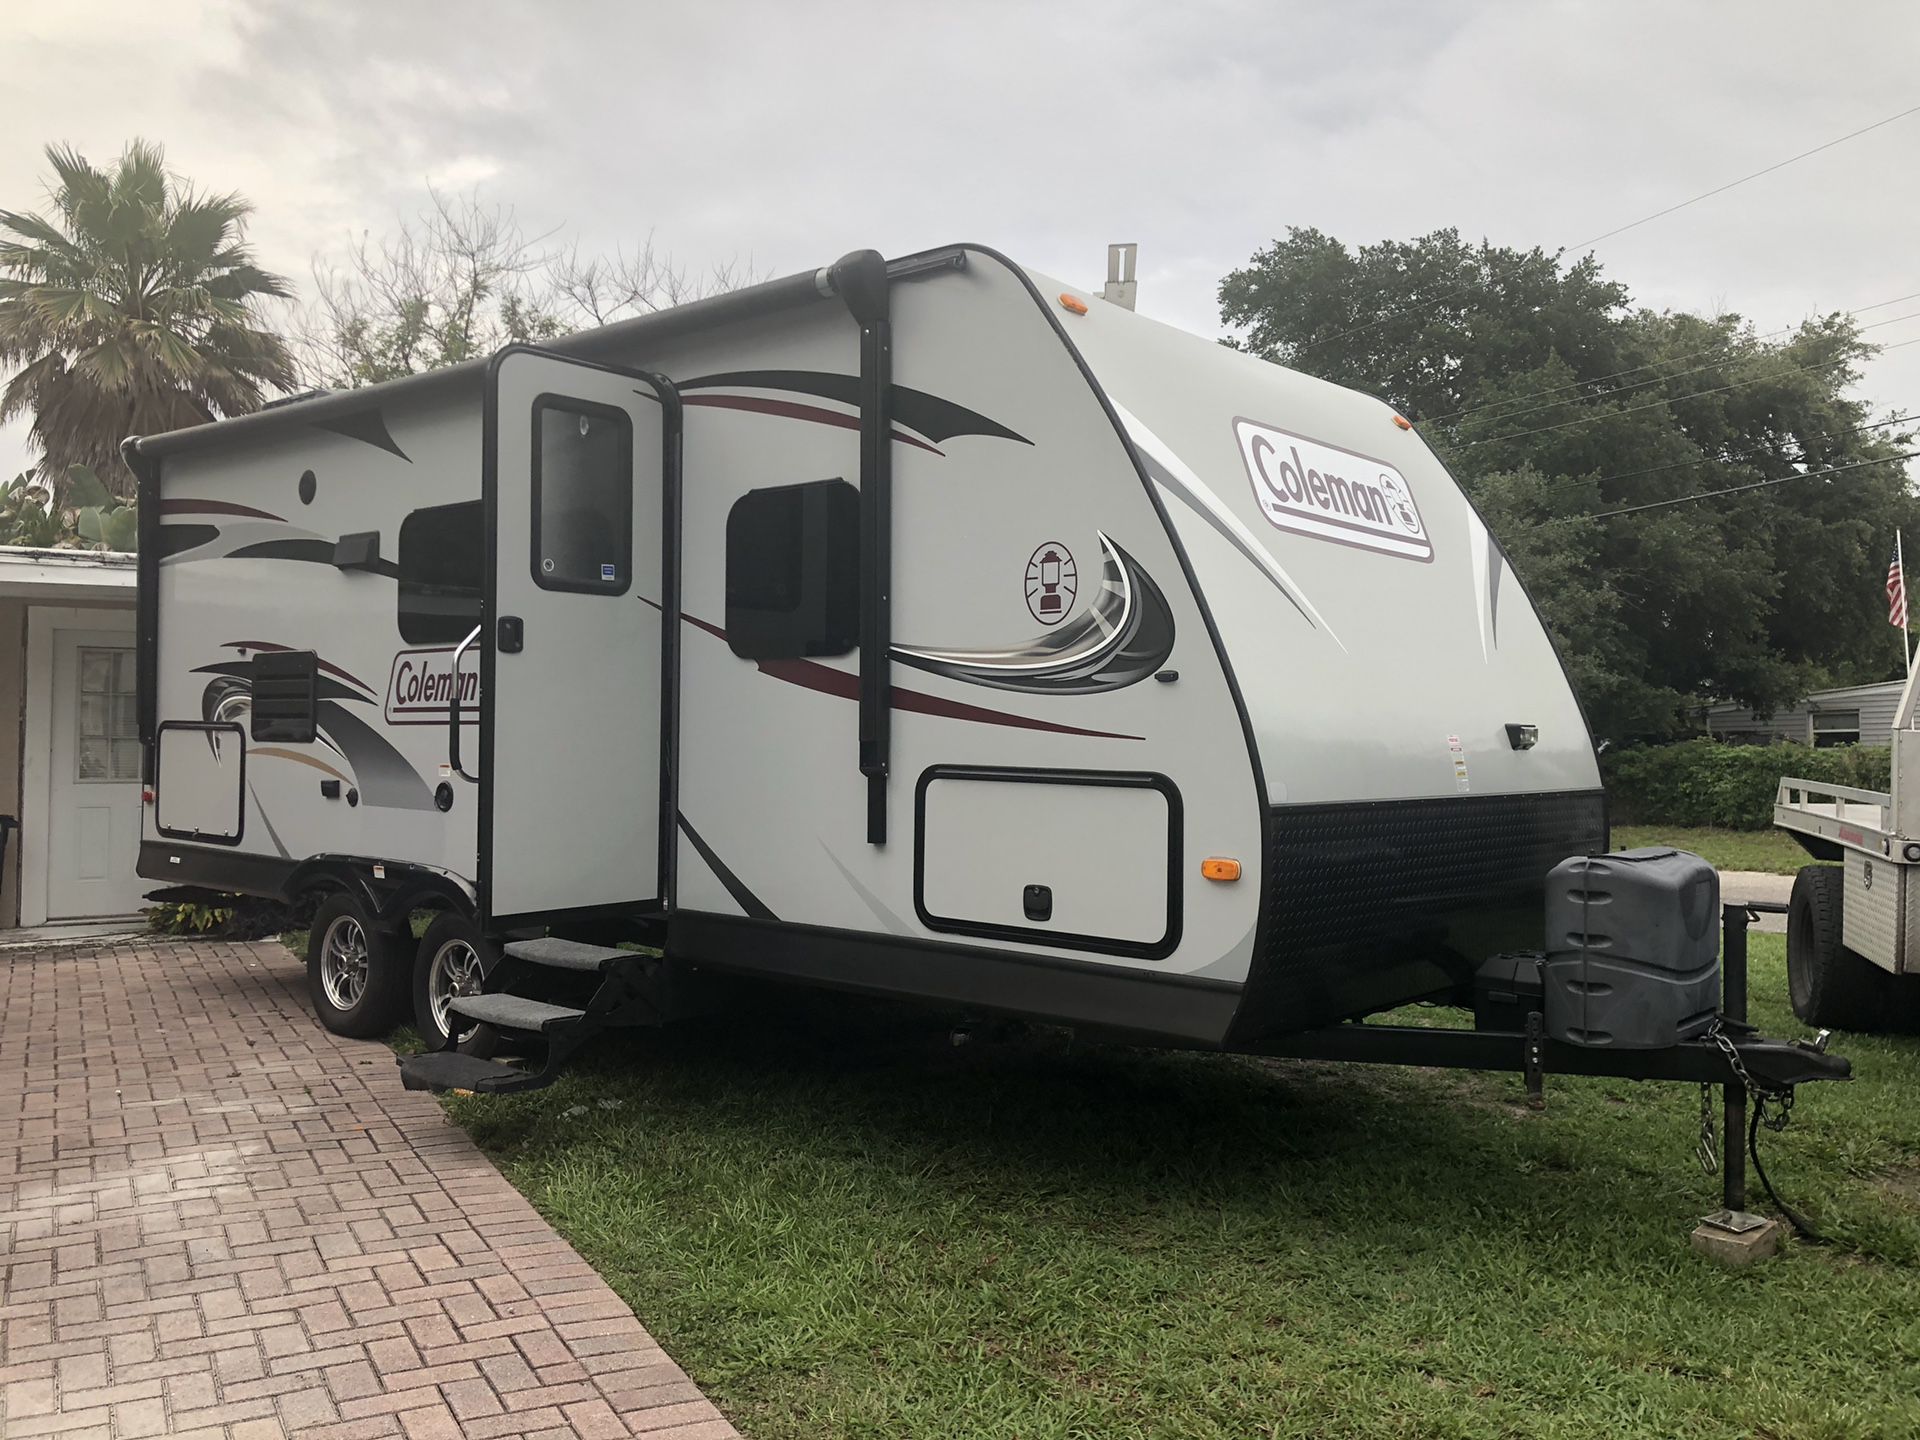 2015 Dutchmen COLEMAN 194QB Camper Travel Trailer RV Temporary Housing 2015 Dutchmen COLEMAN 194QB Sleeps 4 with room for an extra bed on floor when